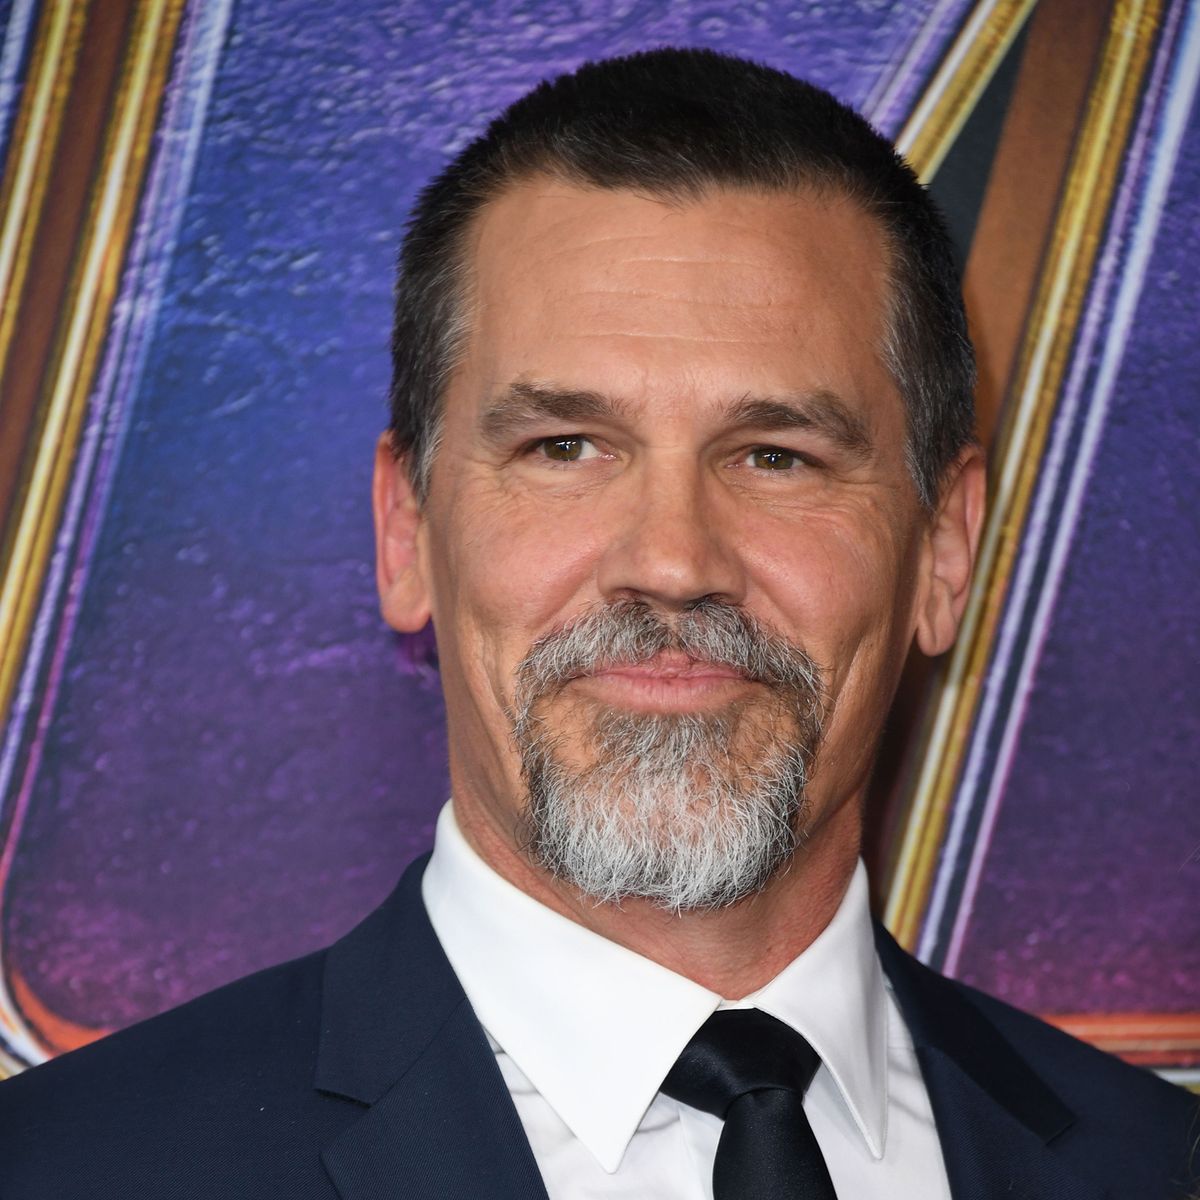 US-ENTERTAINMENT-FILM-CINEMA-AVENGERS-Cinema-entertainmentUS actor Josh Brolin arrives for the World premiere of Marvel Studios' "Avengers: Endgame" at the Los Angeles Convention Center on April 22, 2019 in Los Angeles. (Photo by VALERIE MACON / AFP) (Photo credit should read VALERIE MACON/AFP via Getty Images)